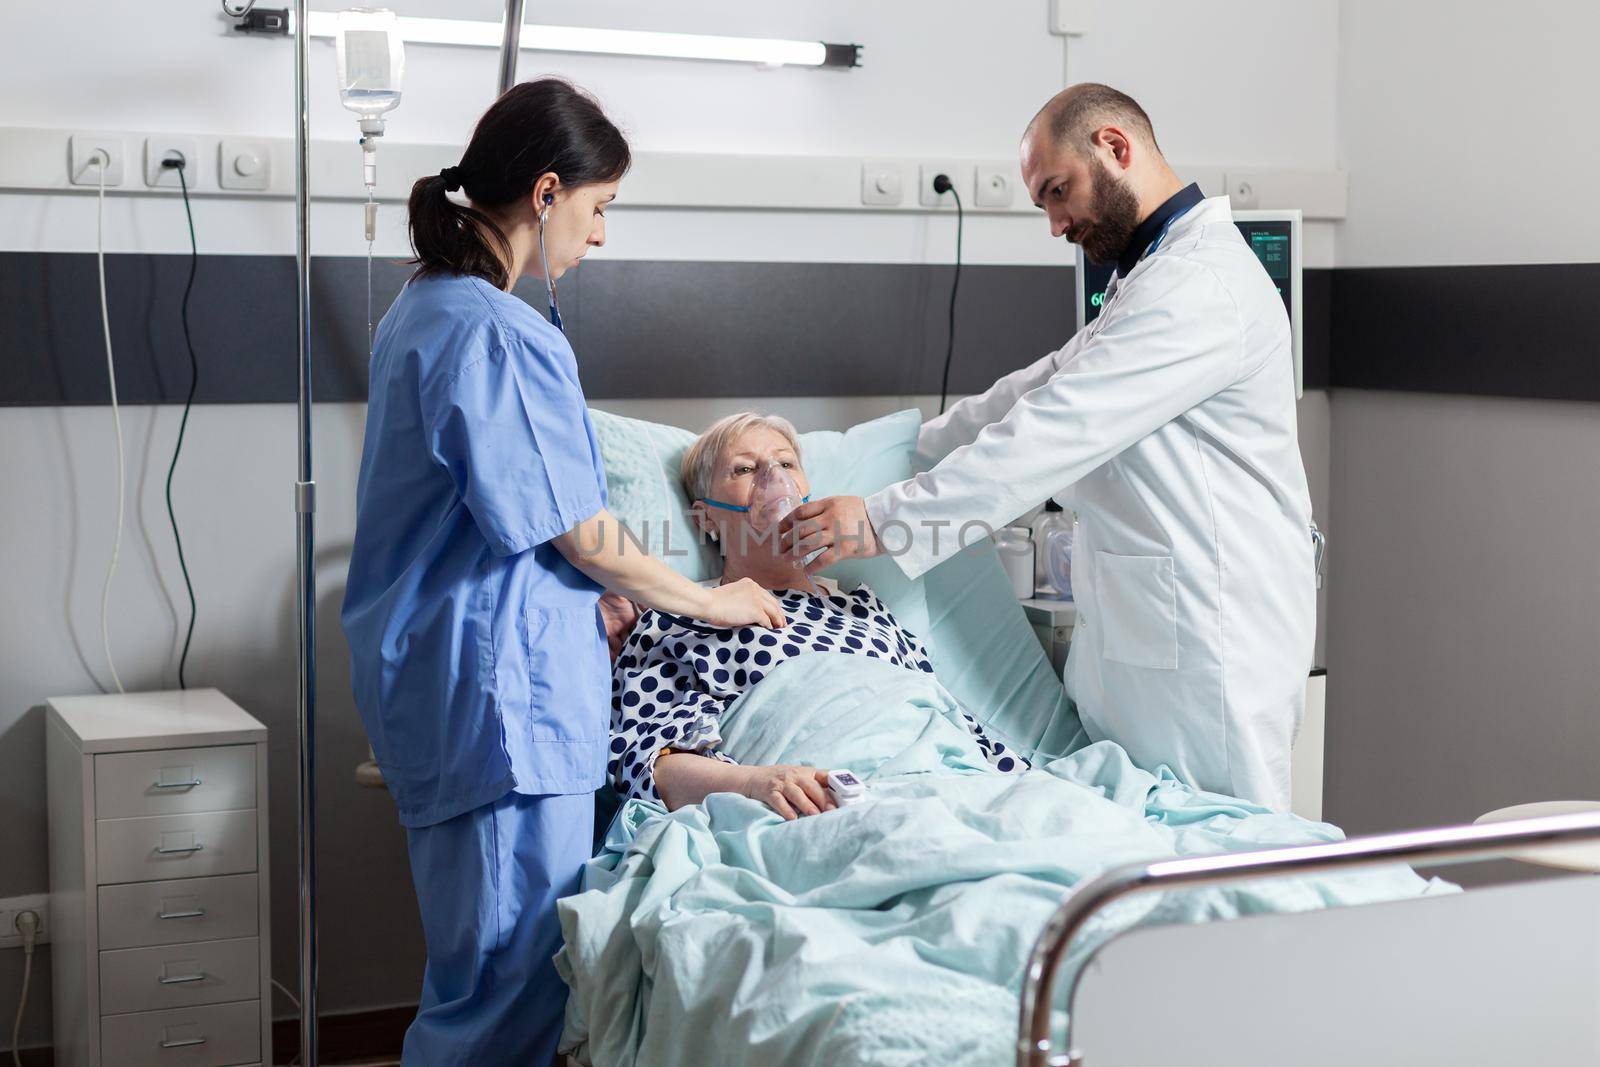 Hospitalized senior woman inhale and exhale through oxygen mask laying in hospital bed. Medical nurse using stethoscope listening patient heart. Eldely woman with oximeter attached on finger.